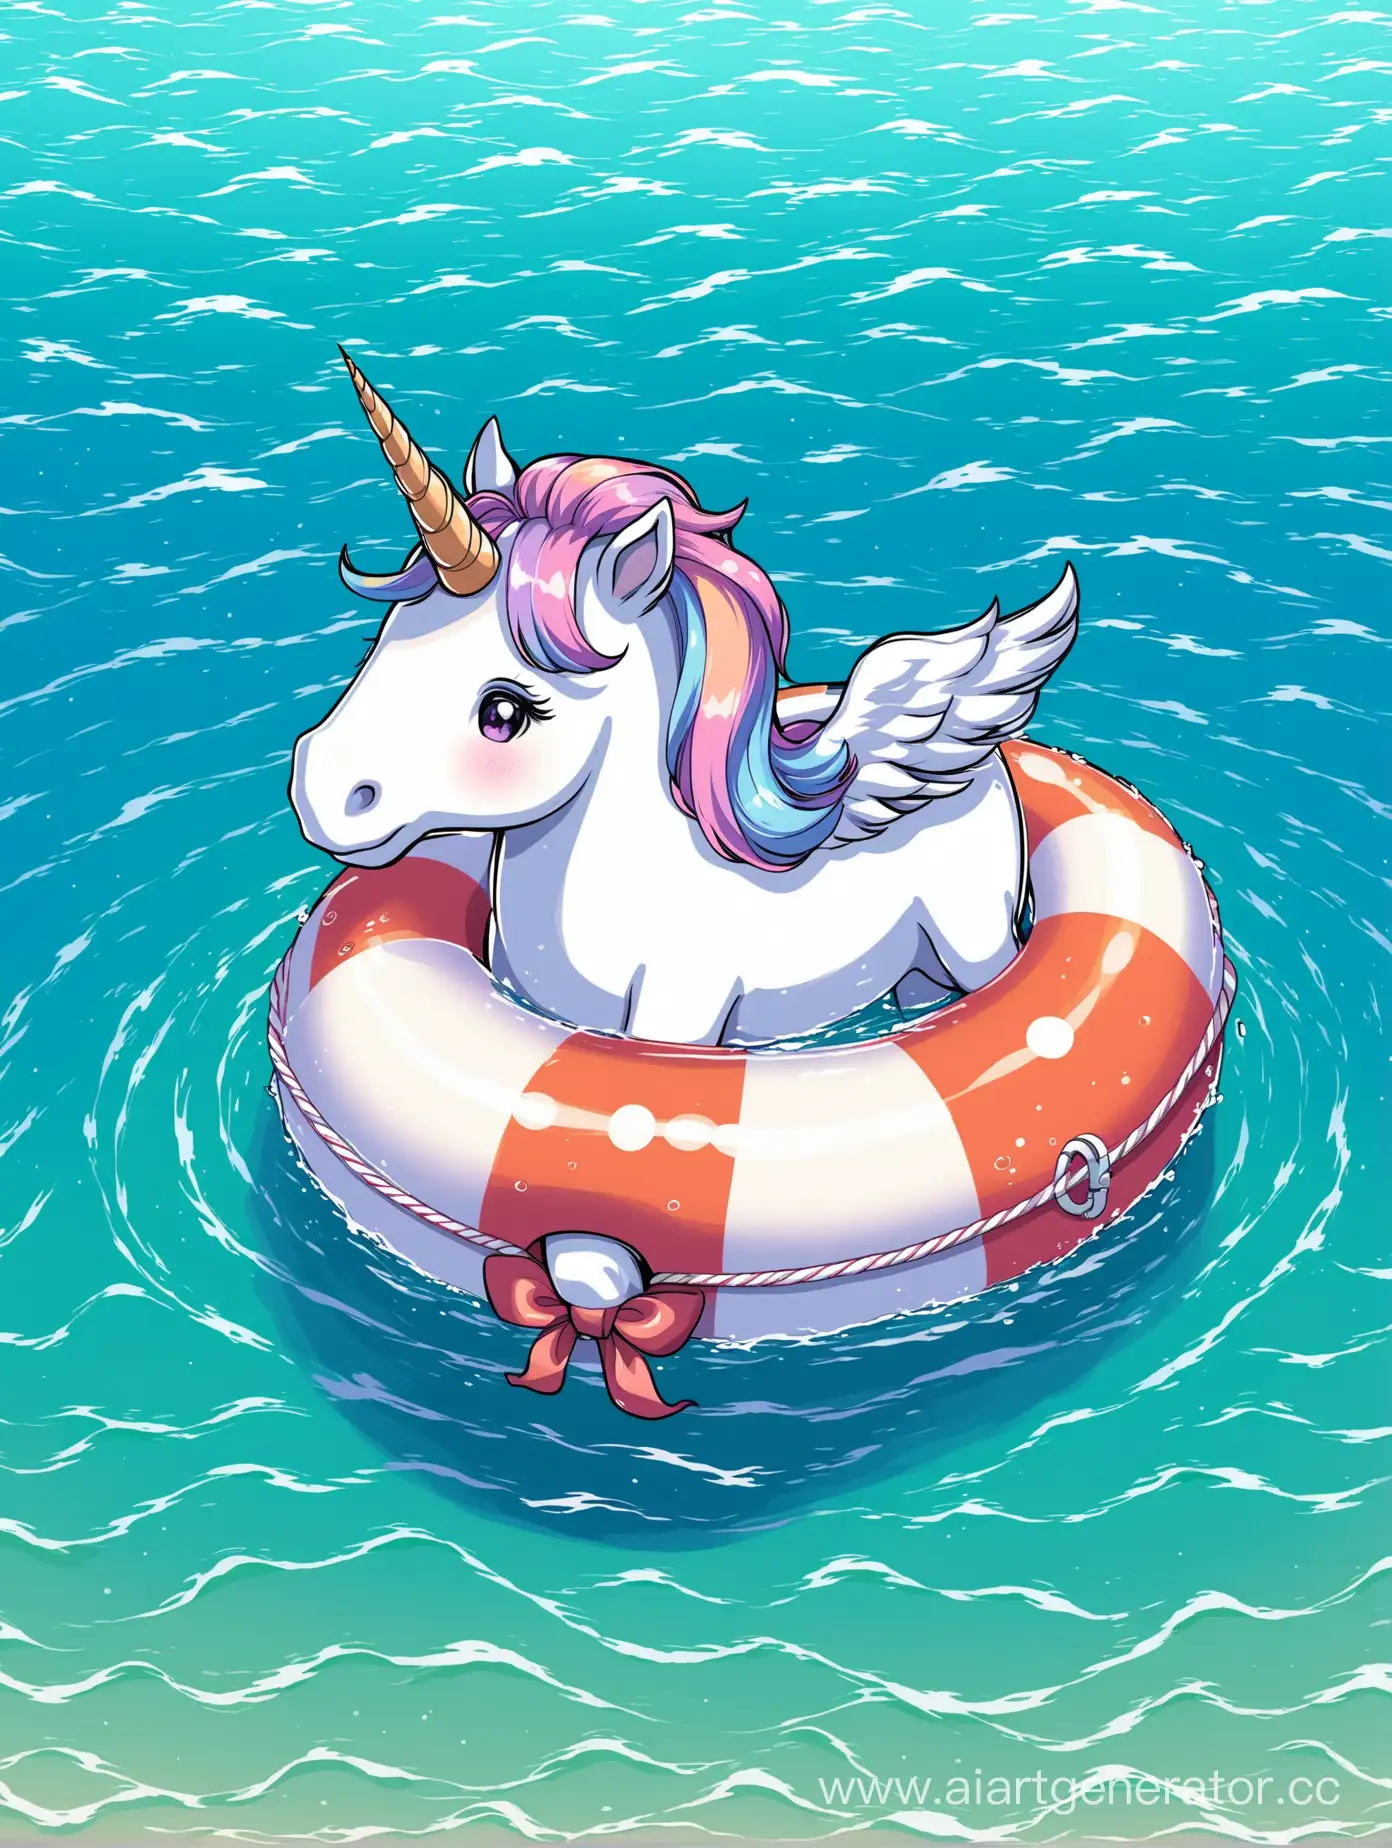 Majestic-Unicorn-Swimming-in-Ocean-Waves-Inside-a-Lifesaver